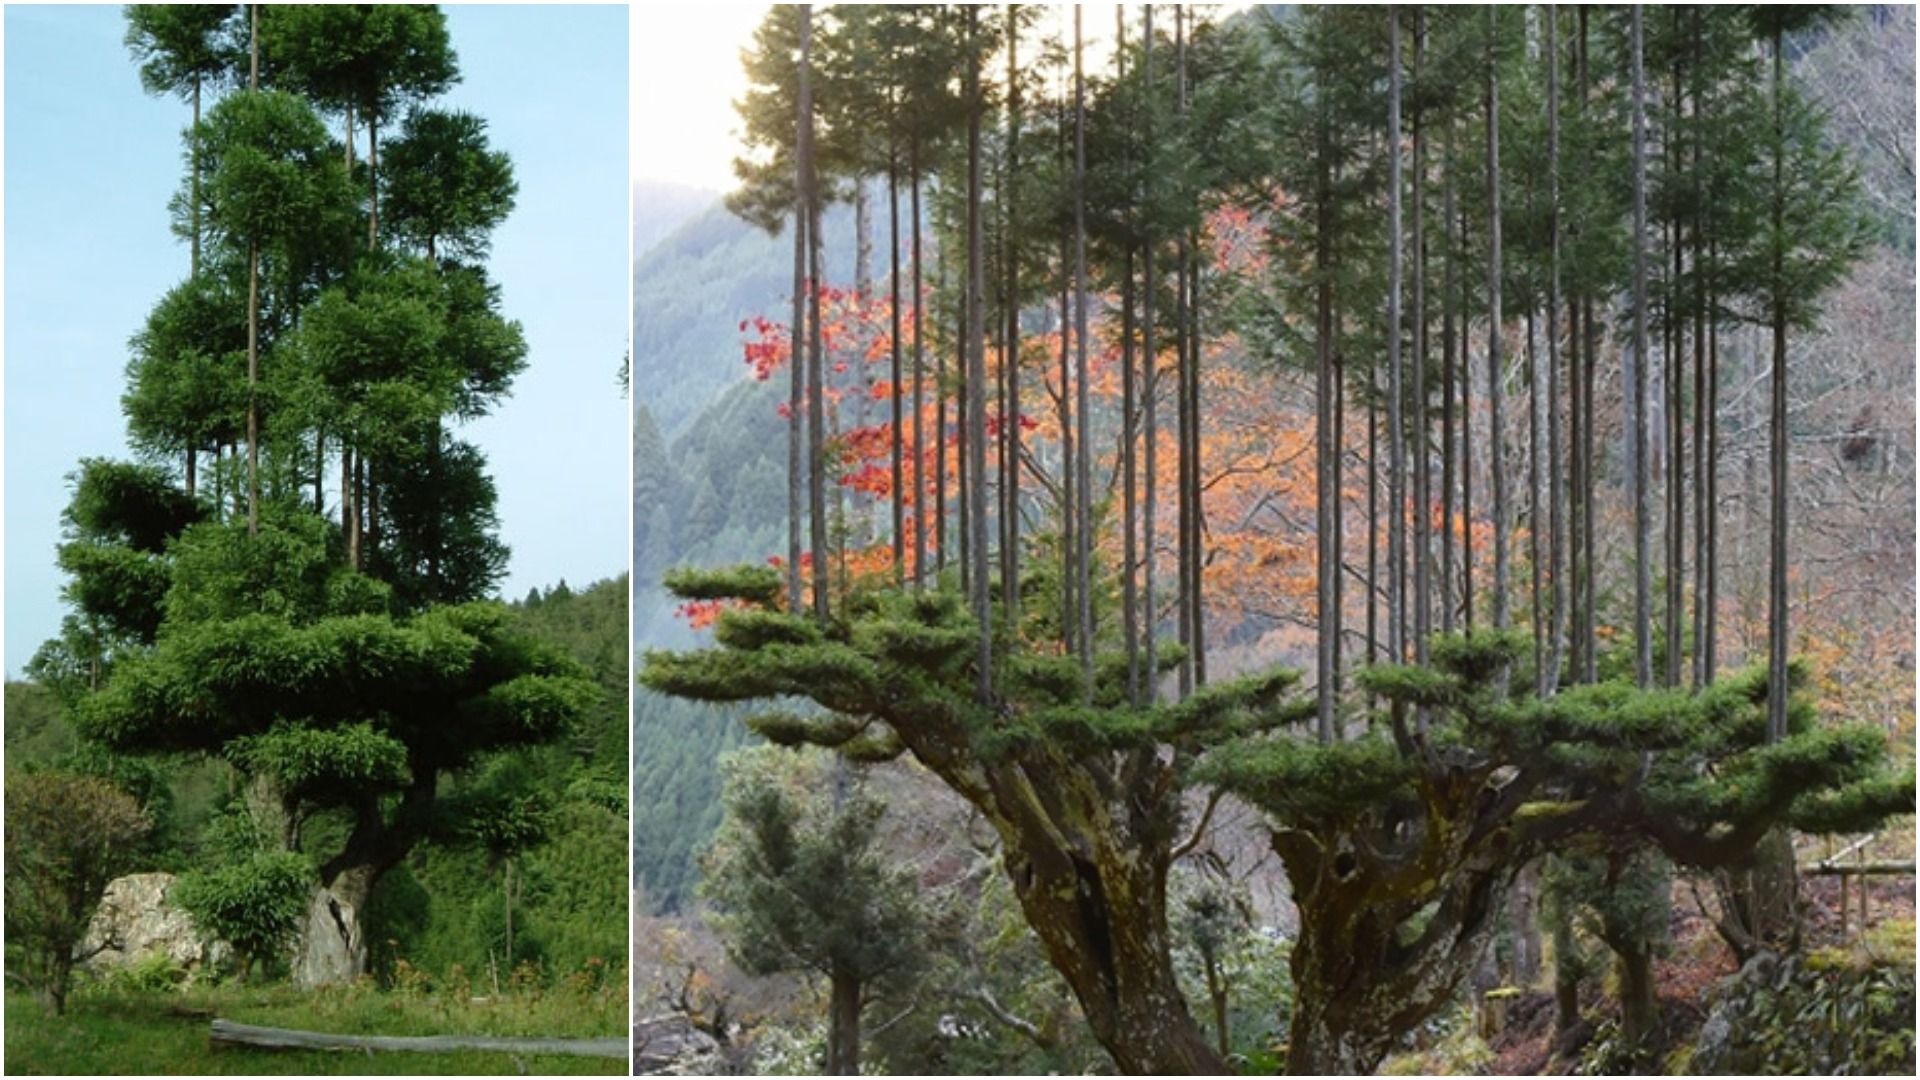 The Japanese Technique of Daisugi Tree-Growing